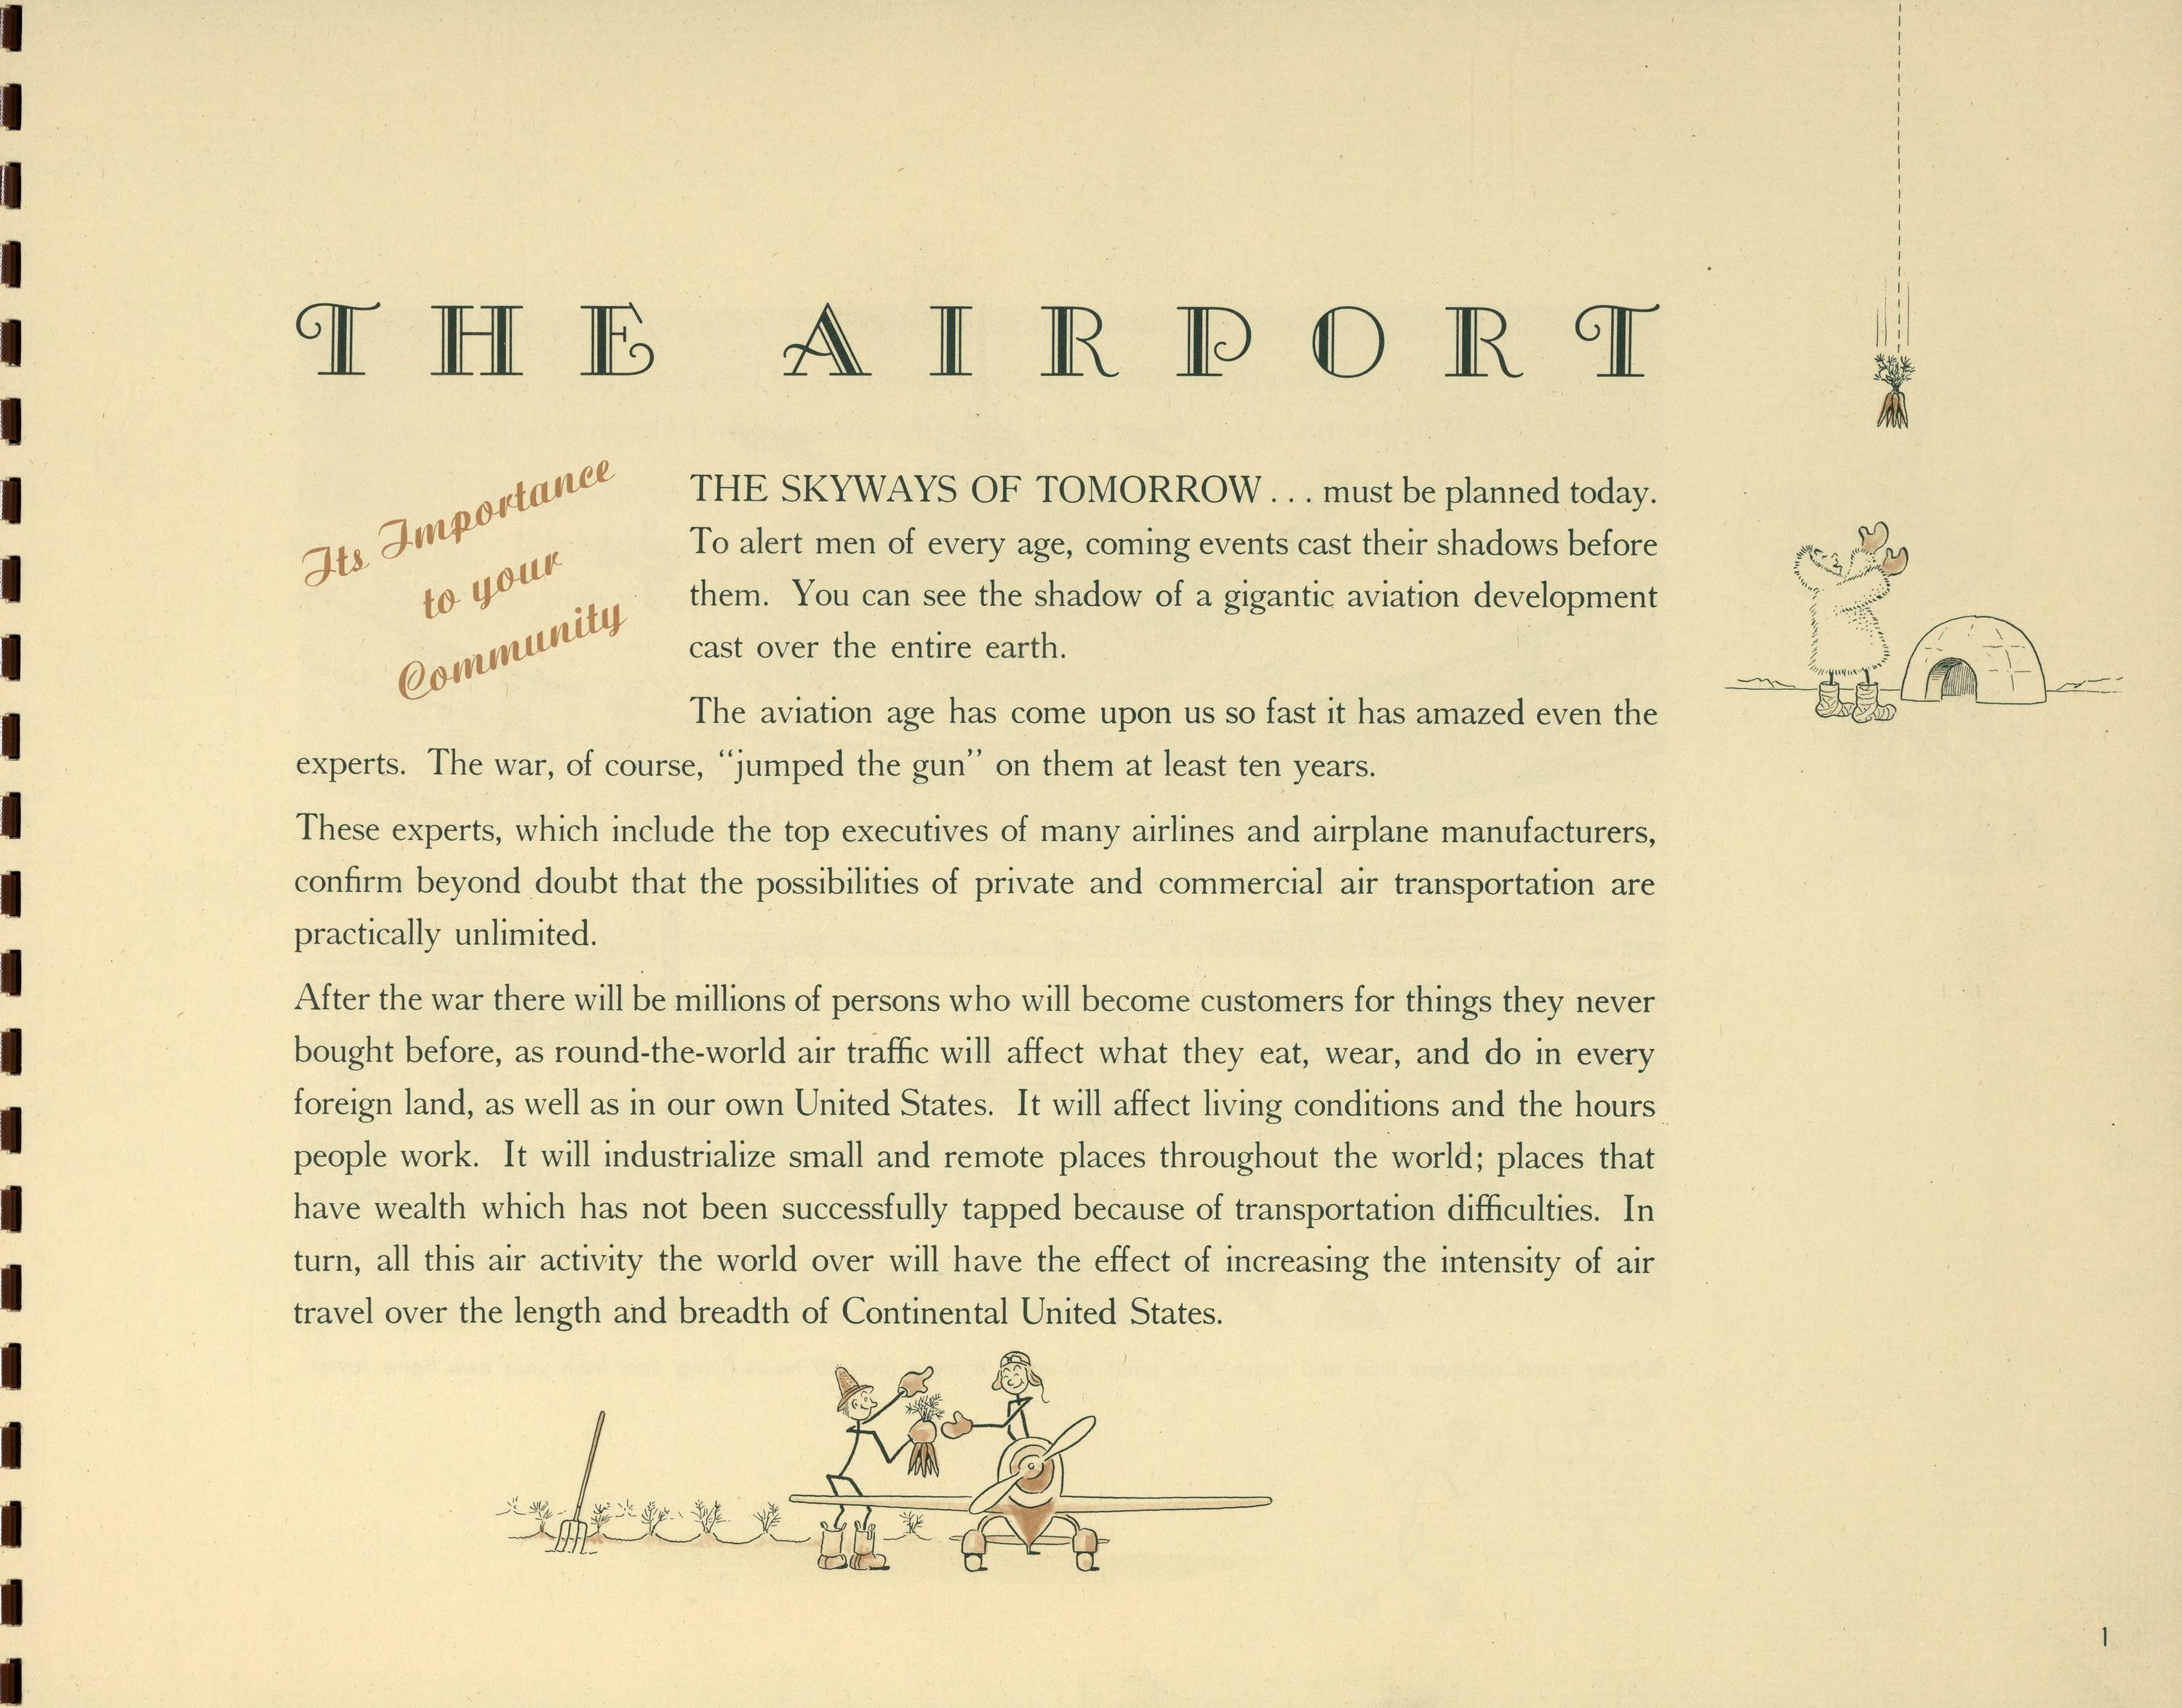 The Airport... Its Importance to your Community : Prepared in the Interest of Schwanerville, For the Coming Age of Flight / By the Aviation Department, Shell Oil Company Incorporated. — Sacramento, 1944